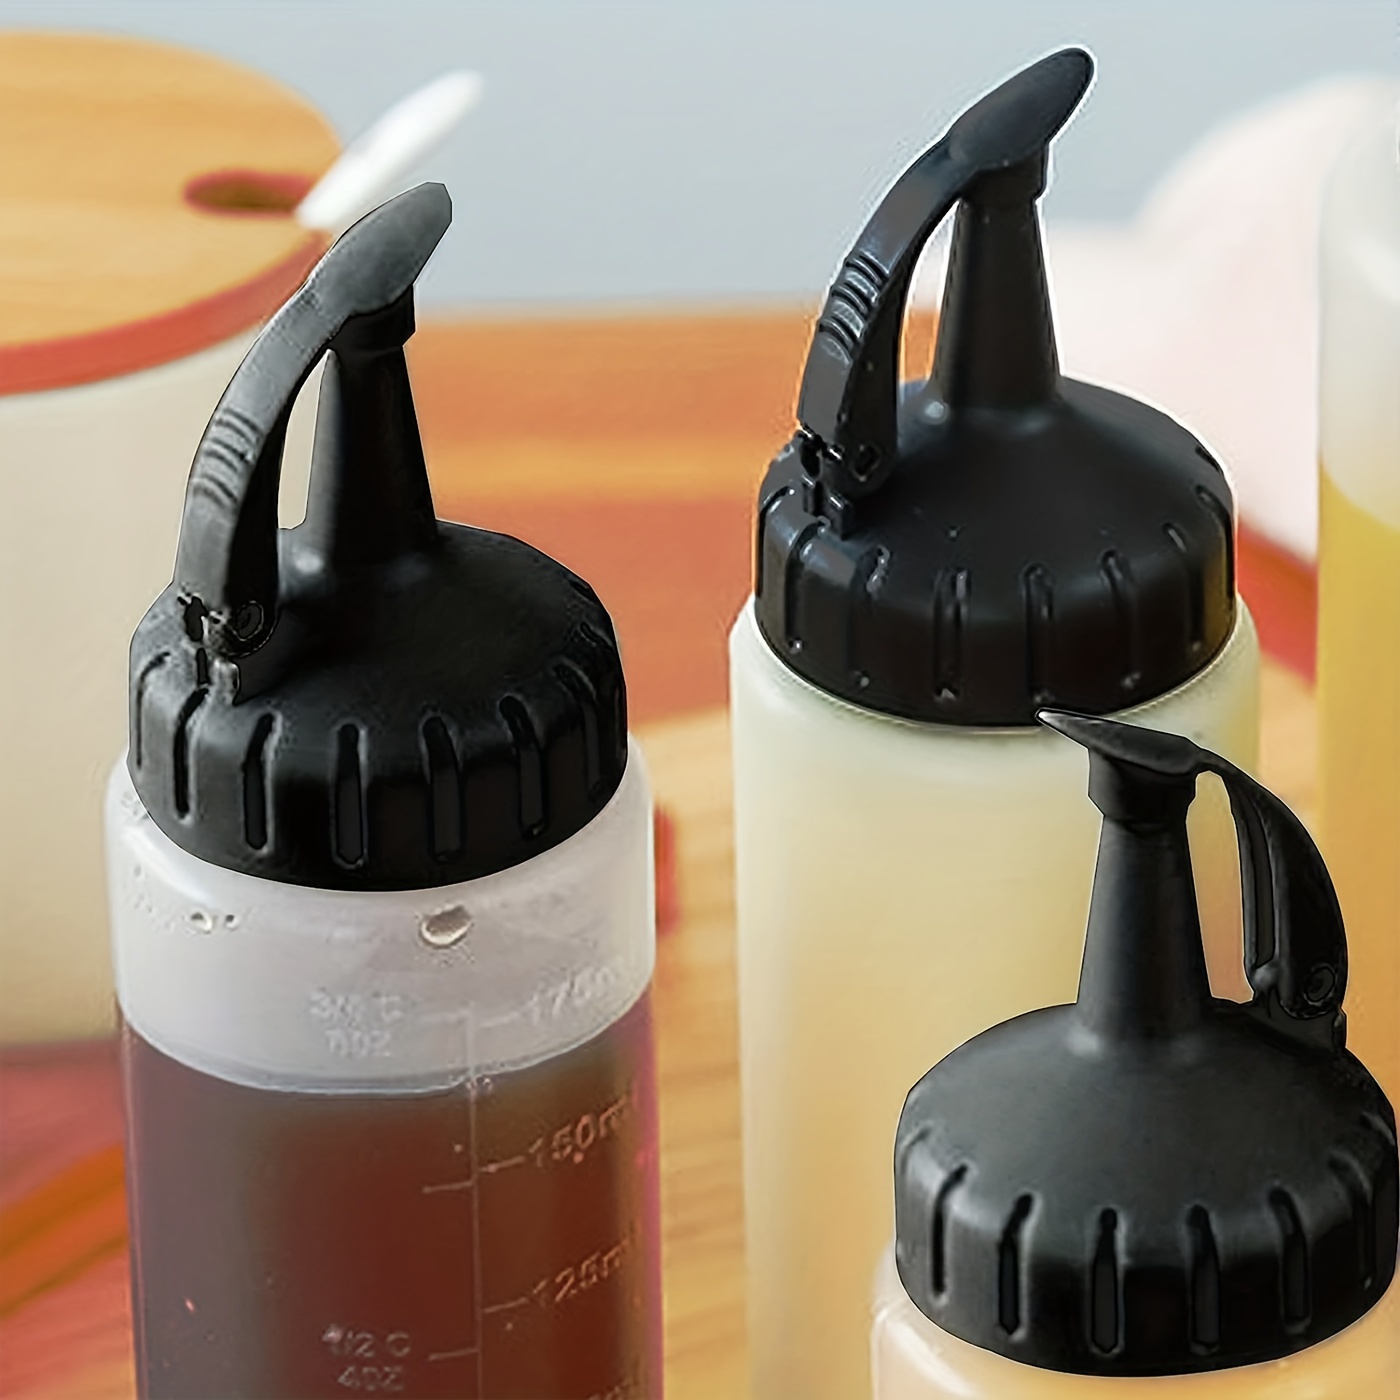 OXO Chef's Squeeze Bottles